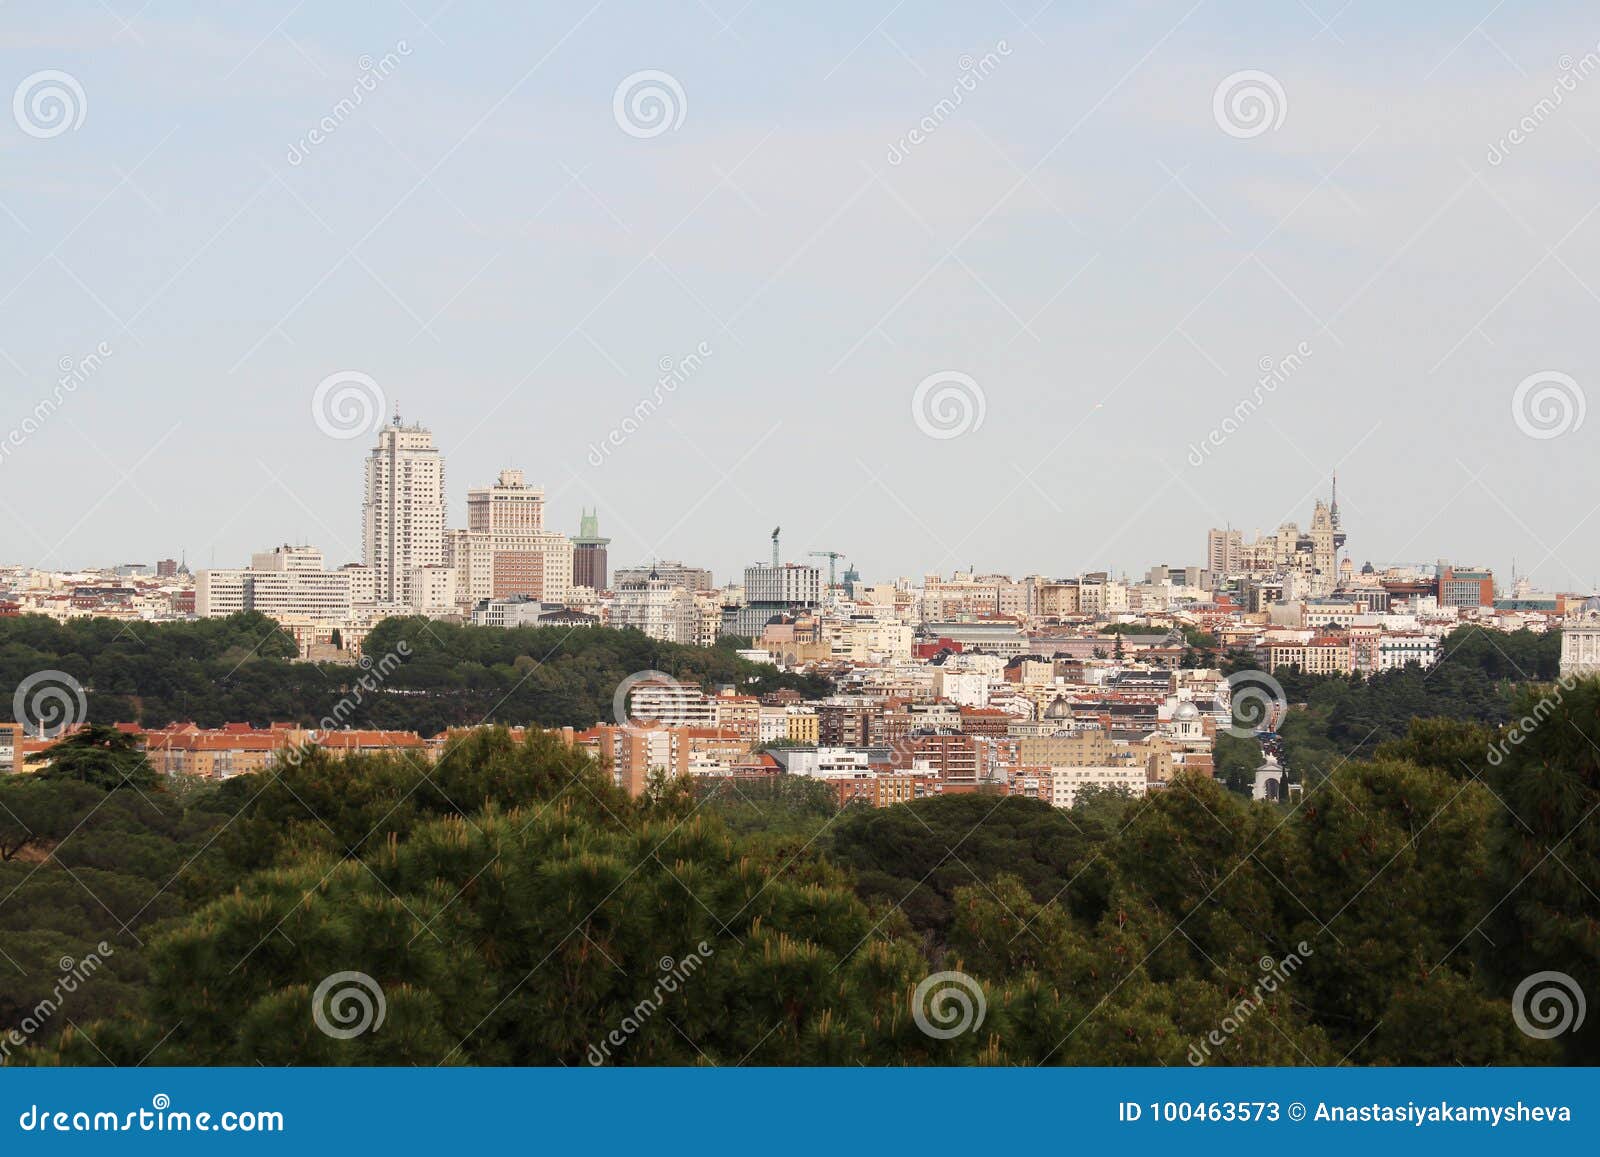 view to the historical center of madrid from casa de campa